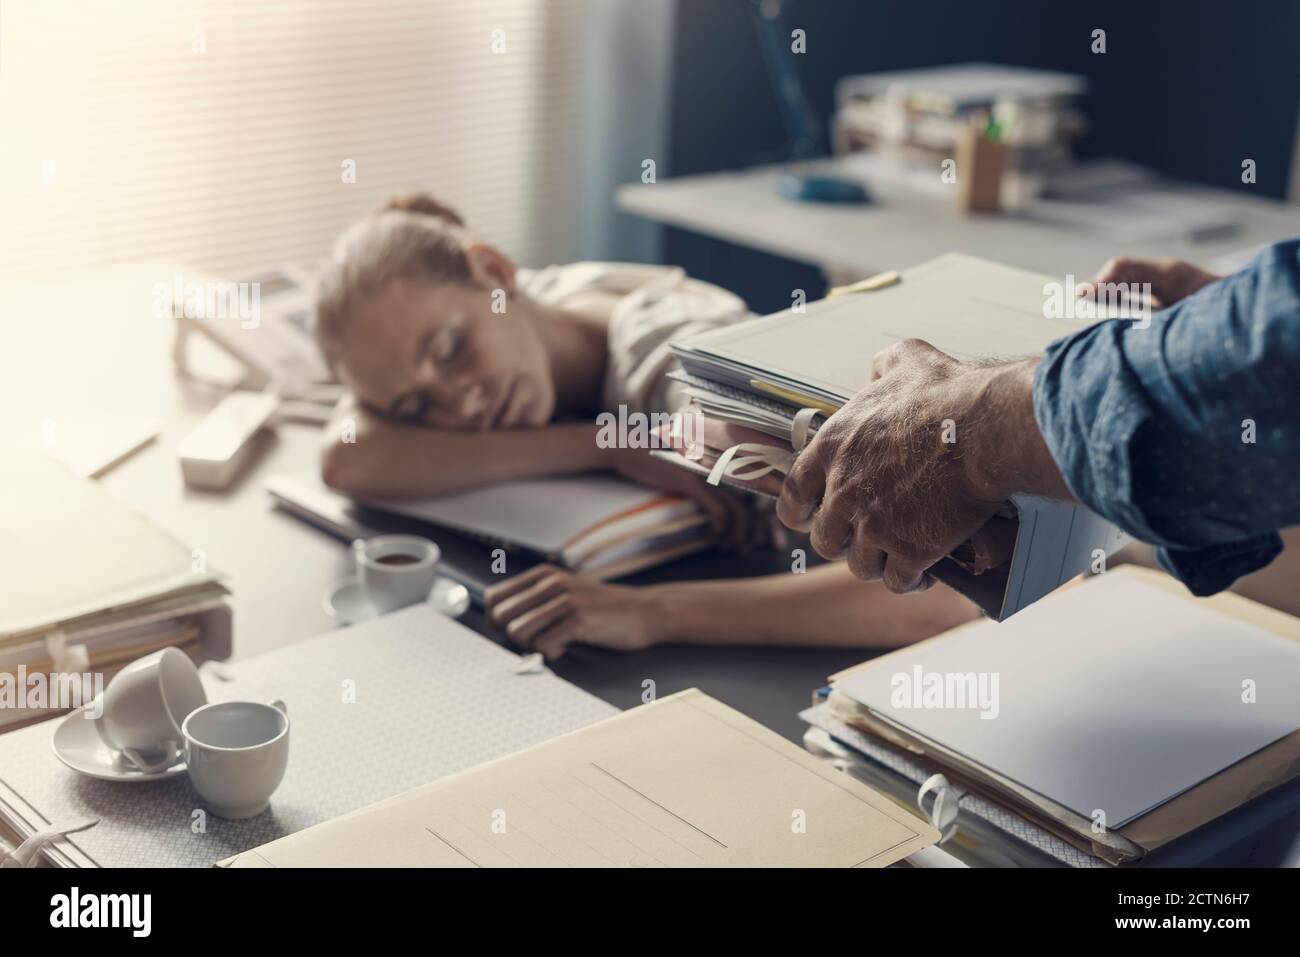 Tired lazy woman sleeping on the office desk, her boss is bringing a pile of paperwork to her desk Stock Photo